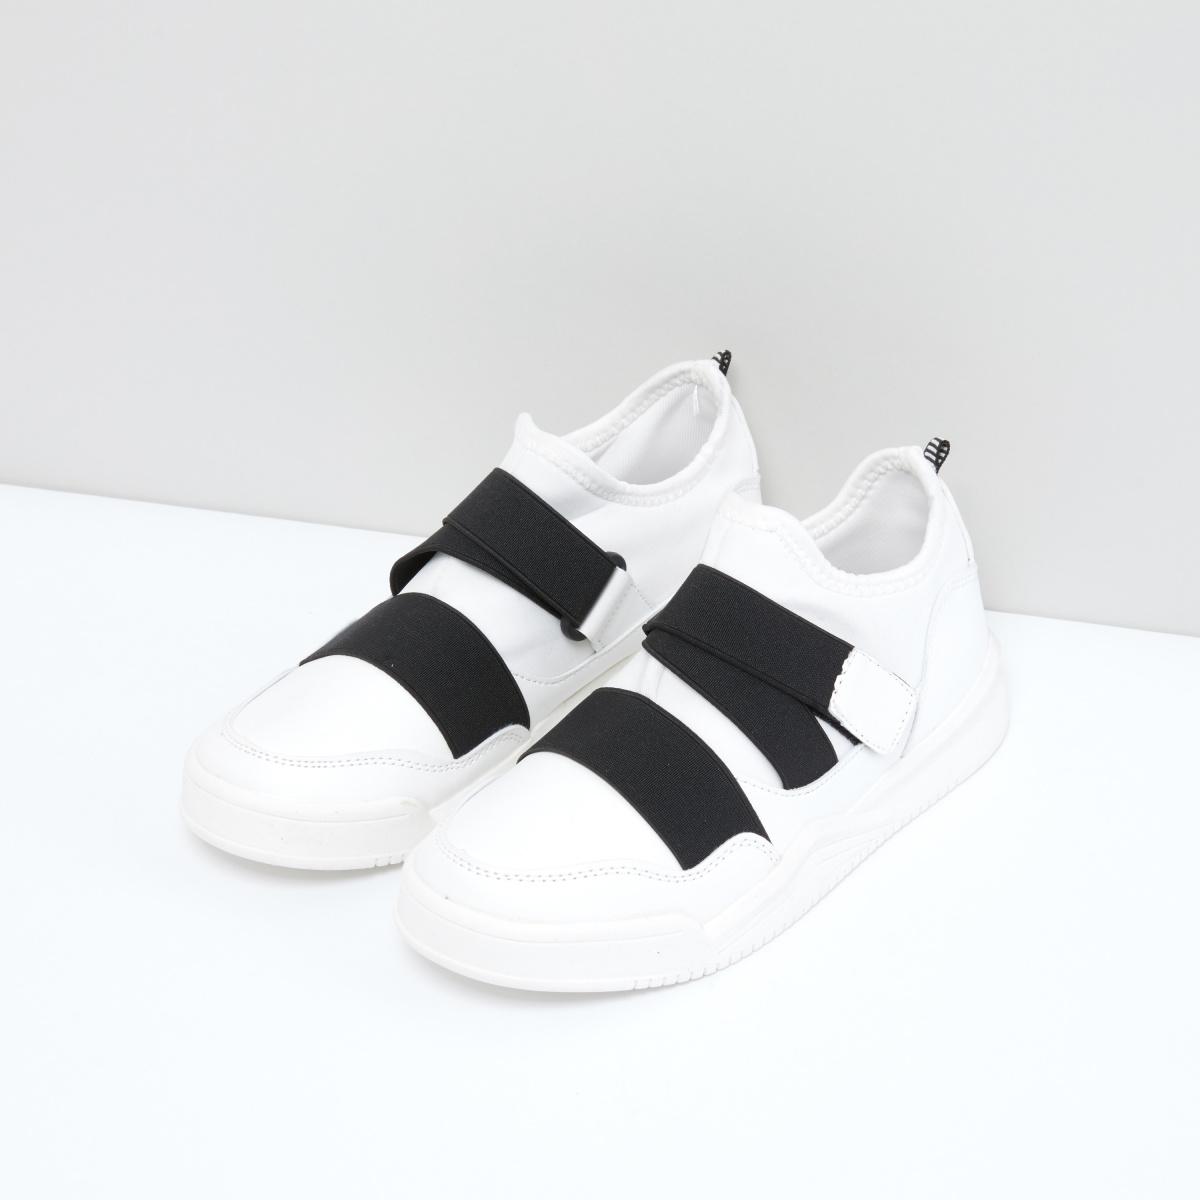 Slip-On Sports Shoes with Elasticised Straps and Hook and Loop Closure